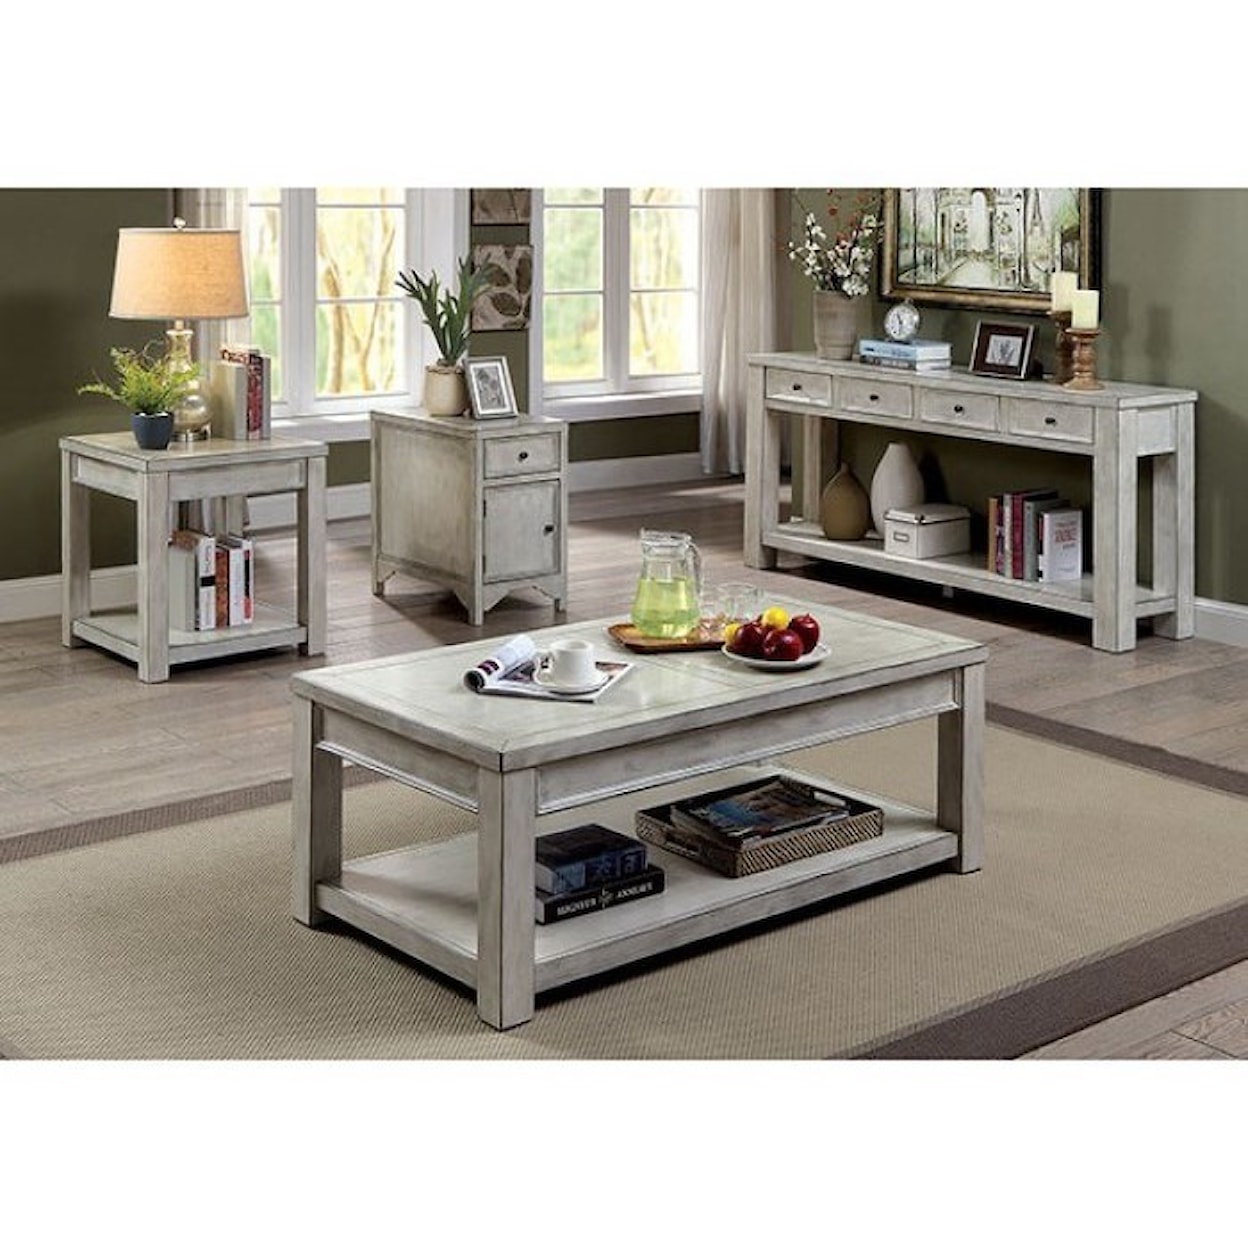 Furniture of America Meadow End Table